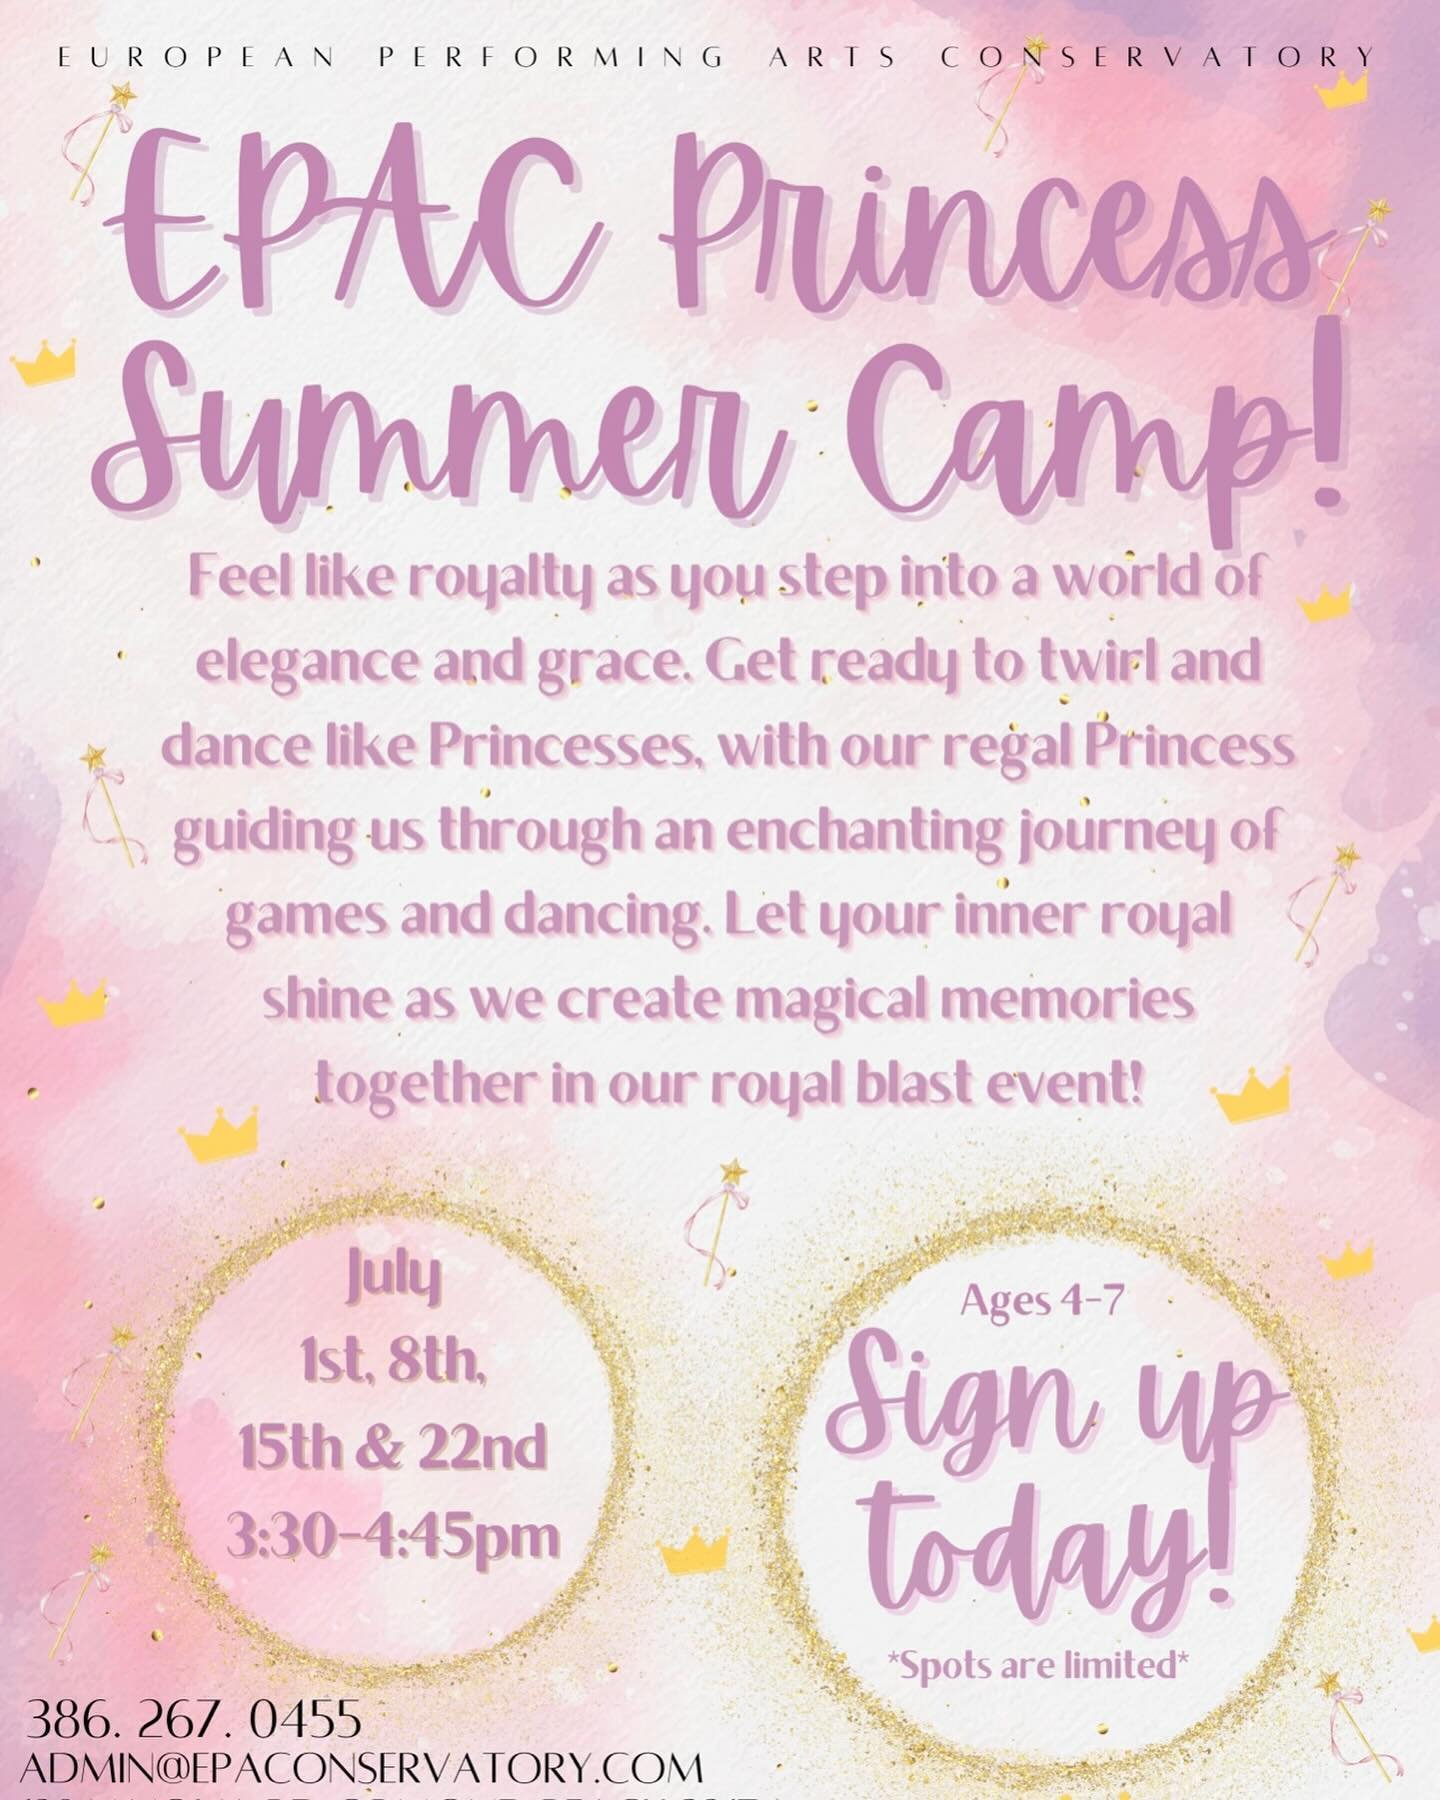 EPAC PRINCESS SUMMER CAMP! 👑 

Sign your little one up today!!

For more information, email us! 
Admin@epaconservatory.com 

#summer #dancer #dance #kidactivity #local #princess #fun #dancestudio #volusiacounty #flaglercounty #joinus #learning #some